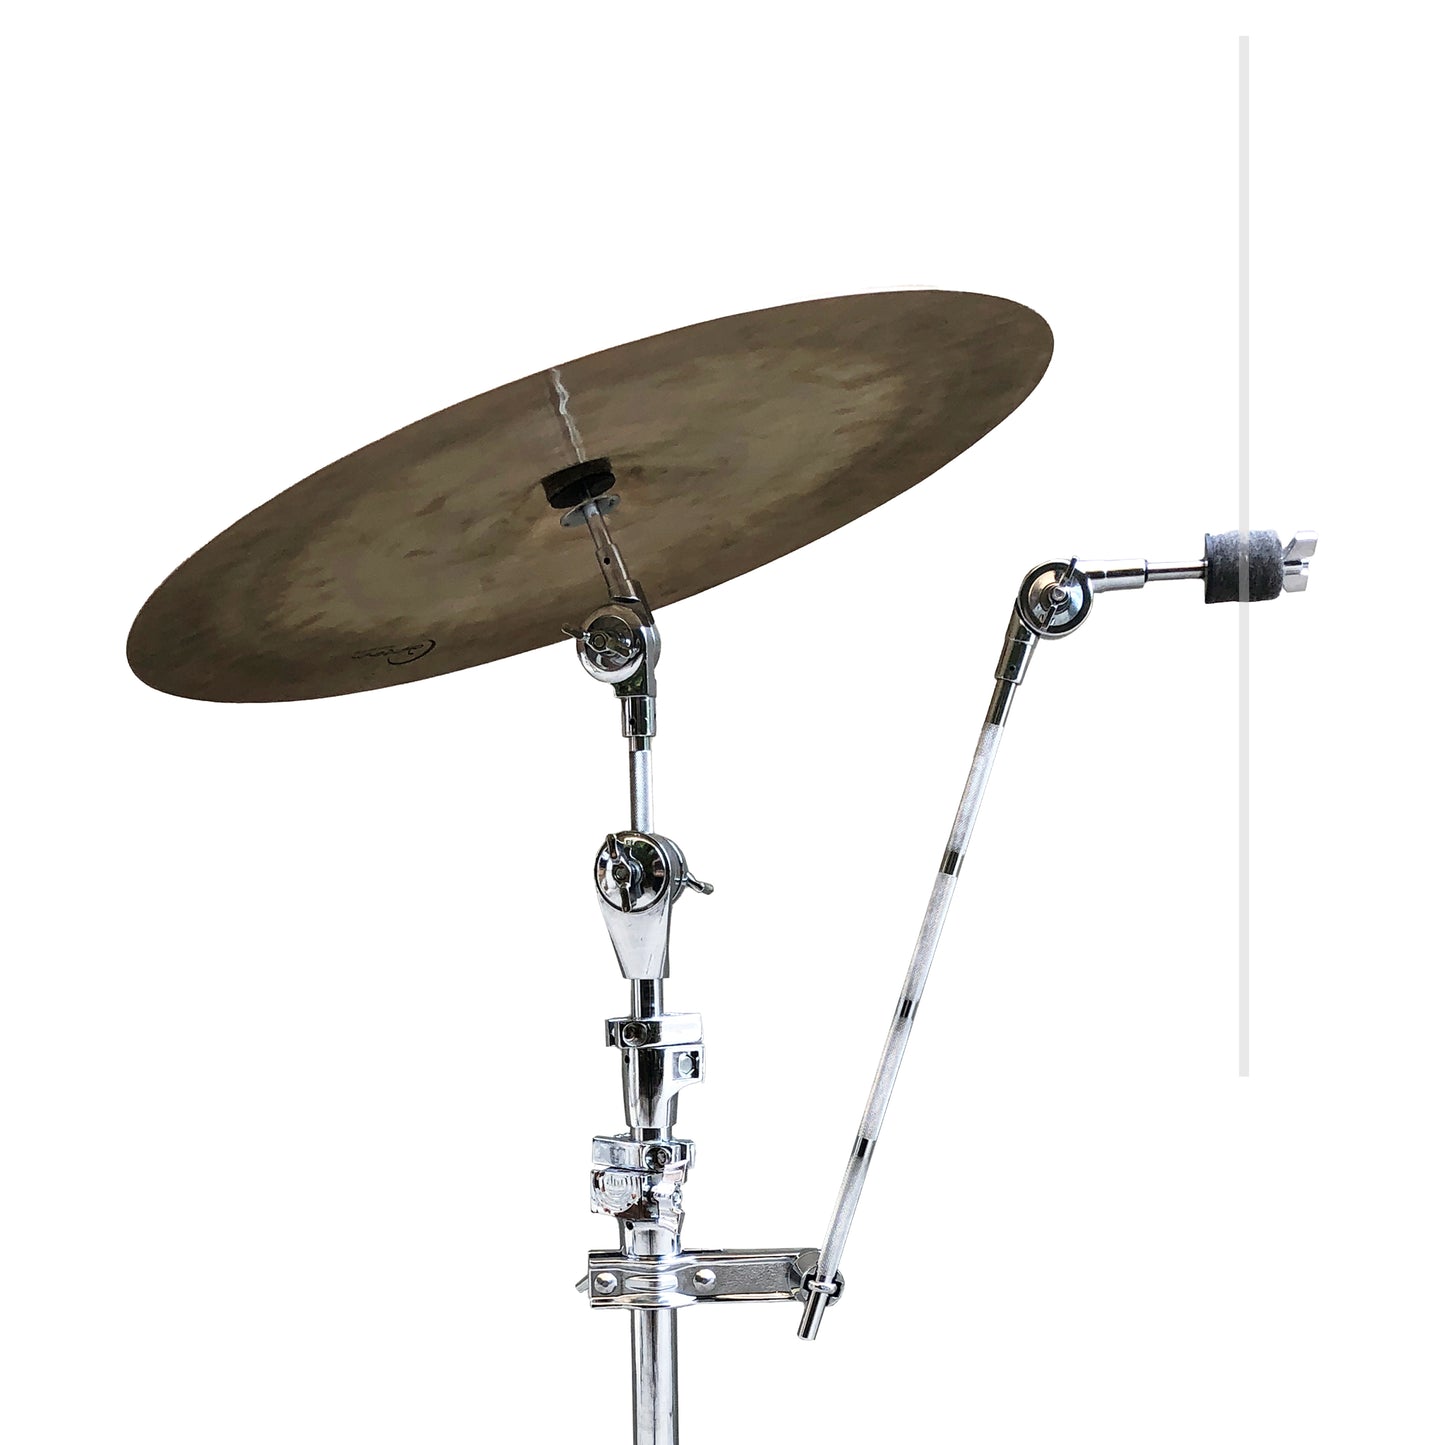 Cymbal Baffle Mounting Attachment. Cymbal Baffles and Stands, Shy Baffles and Sets.